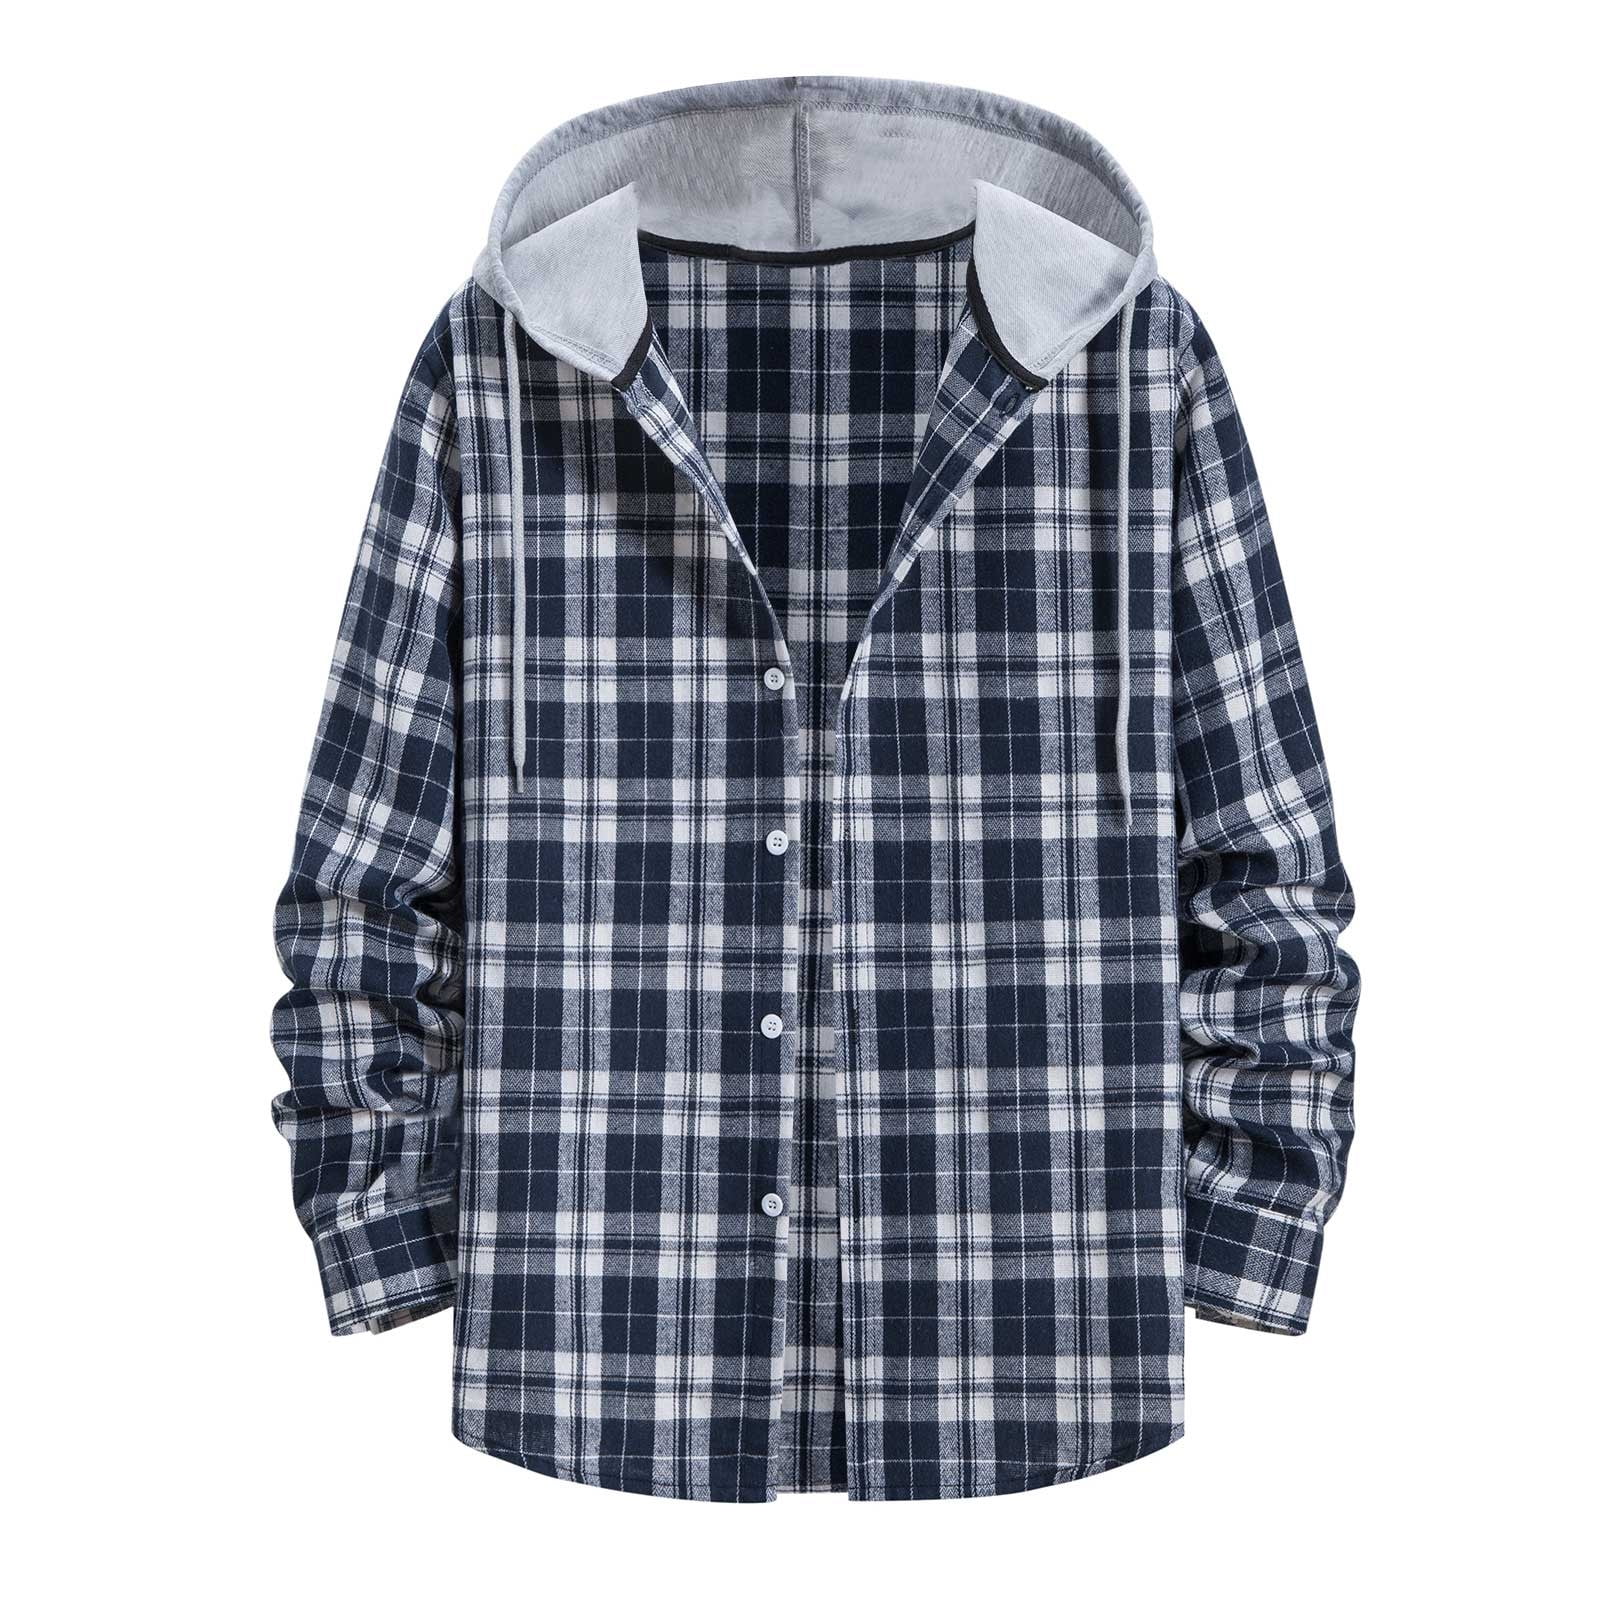 YYDGH Men's Flannel Plaid Shirt Jacket Winter Warm Long Sleeve Quilted  Lined Plaid Drawstring Coats Soft Button Down Thick Shirts with Hood Light  Blue XL 